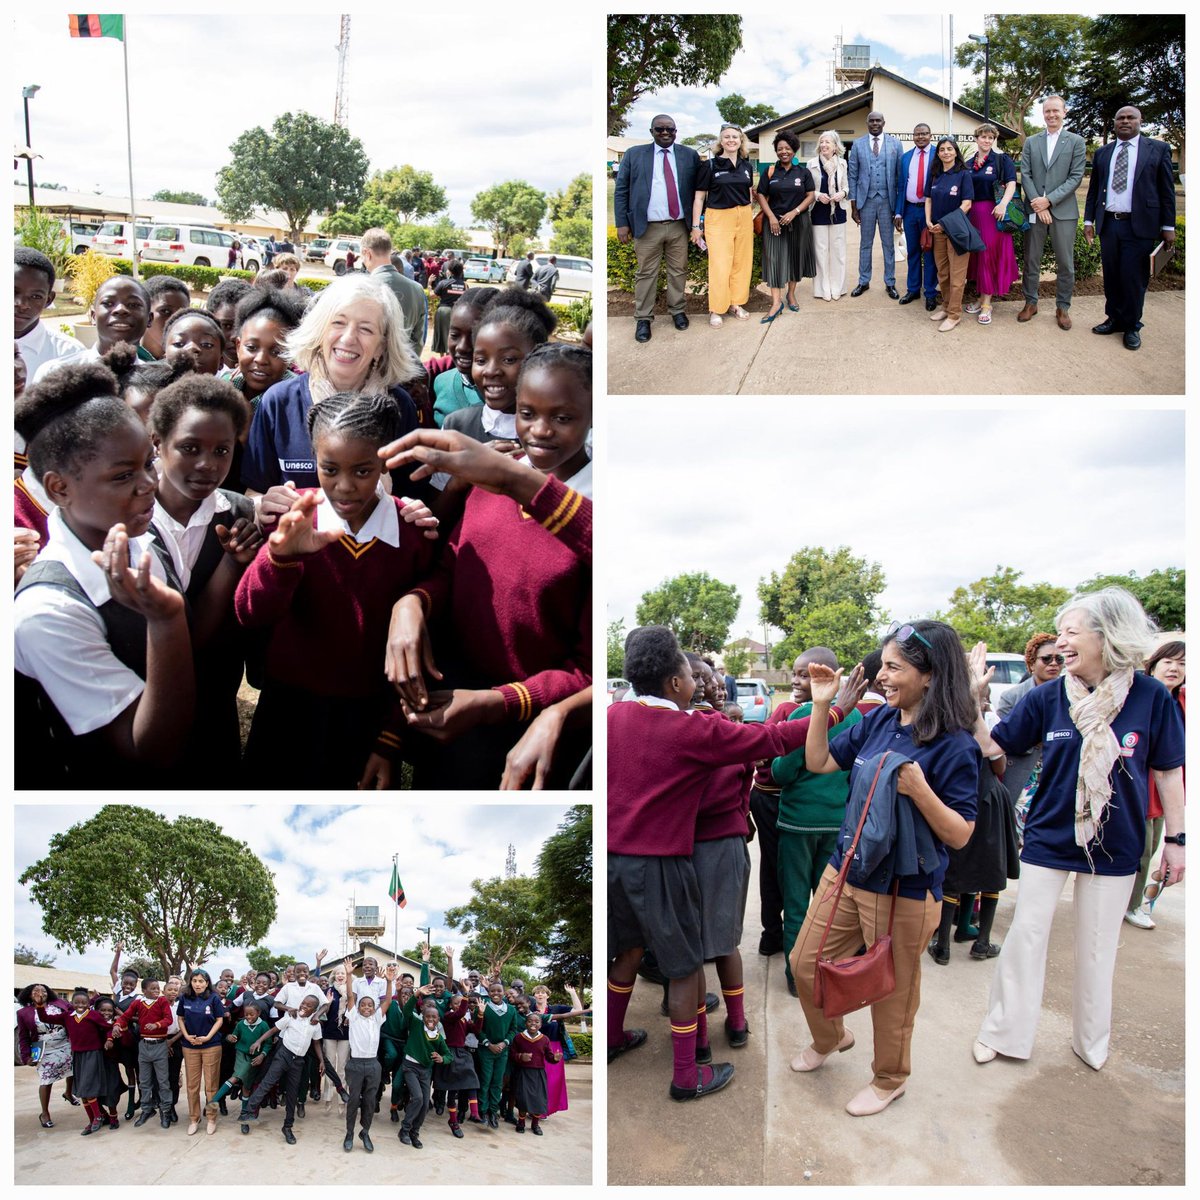 Inspiring day in #Zambia! Thrilled to meet students & teachers, & sit on lessons at Chainda Primary School in Lusaka today. Together, we're #BuildingStrongFoundations through education for every child’s health & well-being. #LearnAndThrive